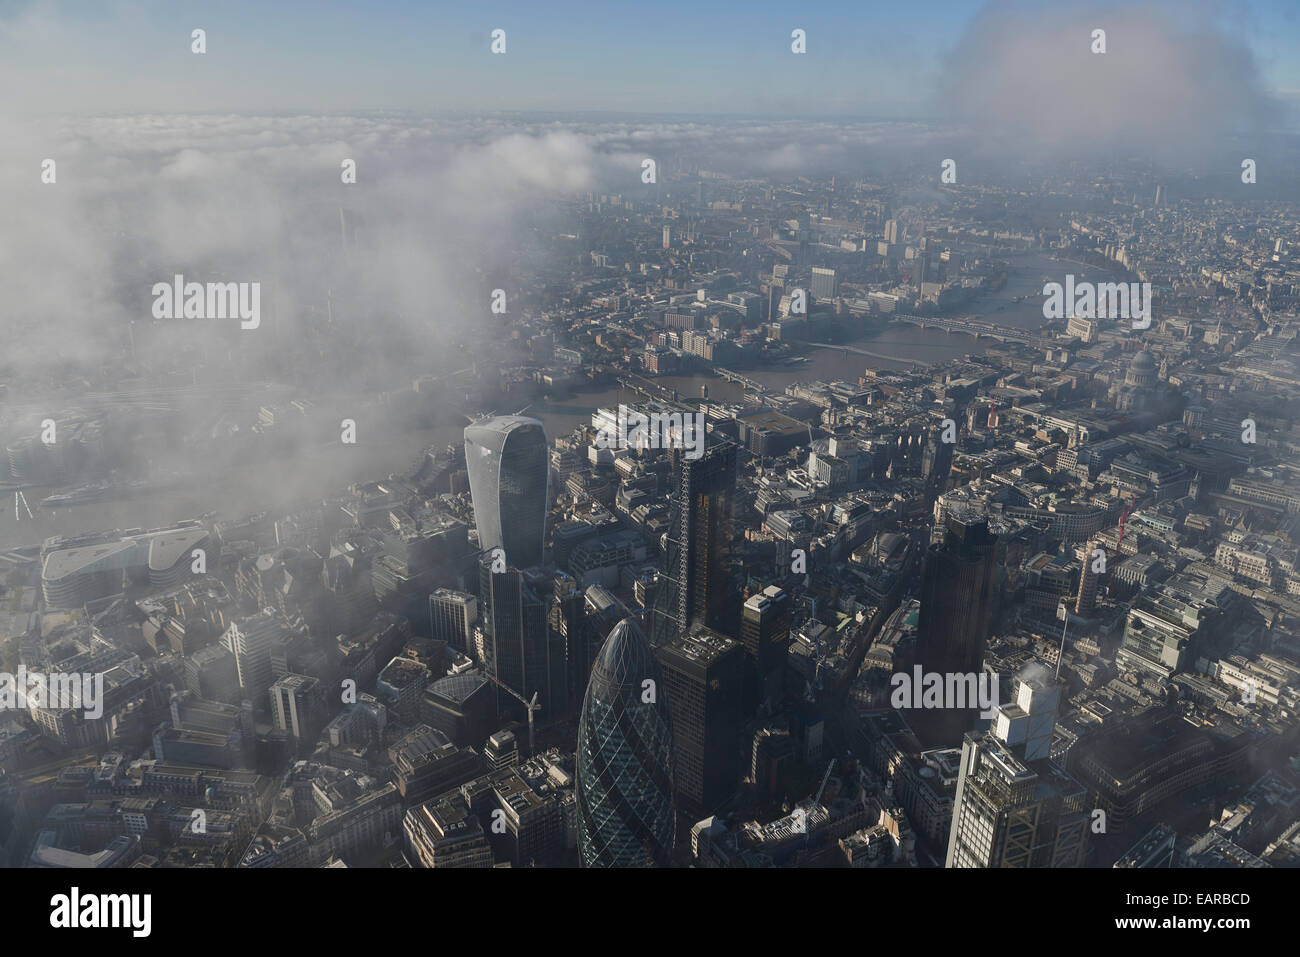 An aerial view of the City of London looking towards the River Thames amid low cloud Stock Photo